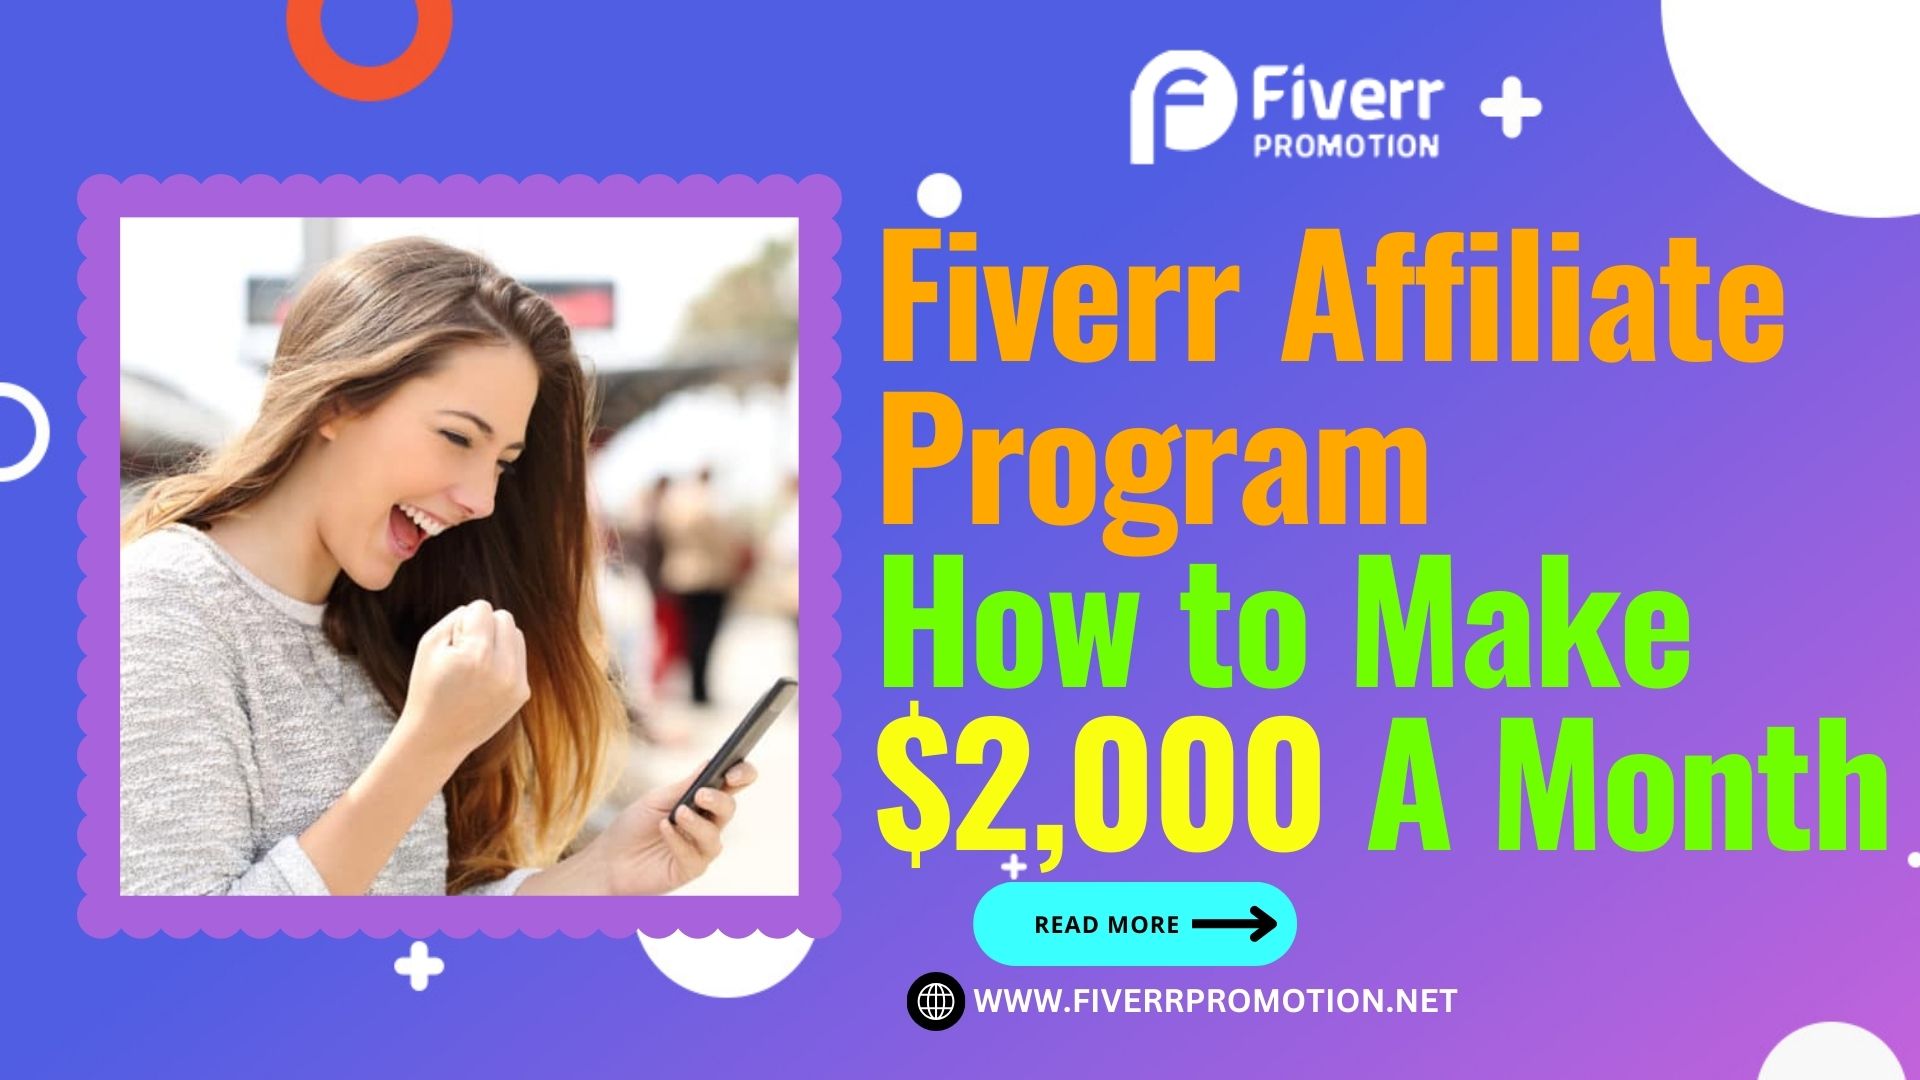 Fiverr Affiliate Program: How to Make $2,000 a Month